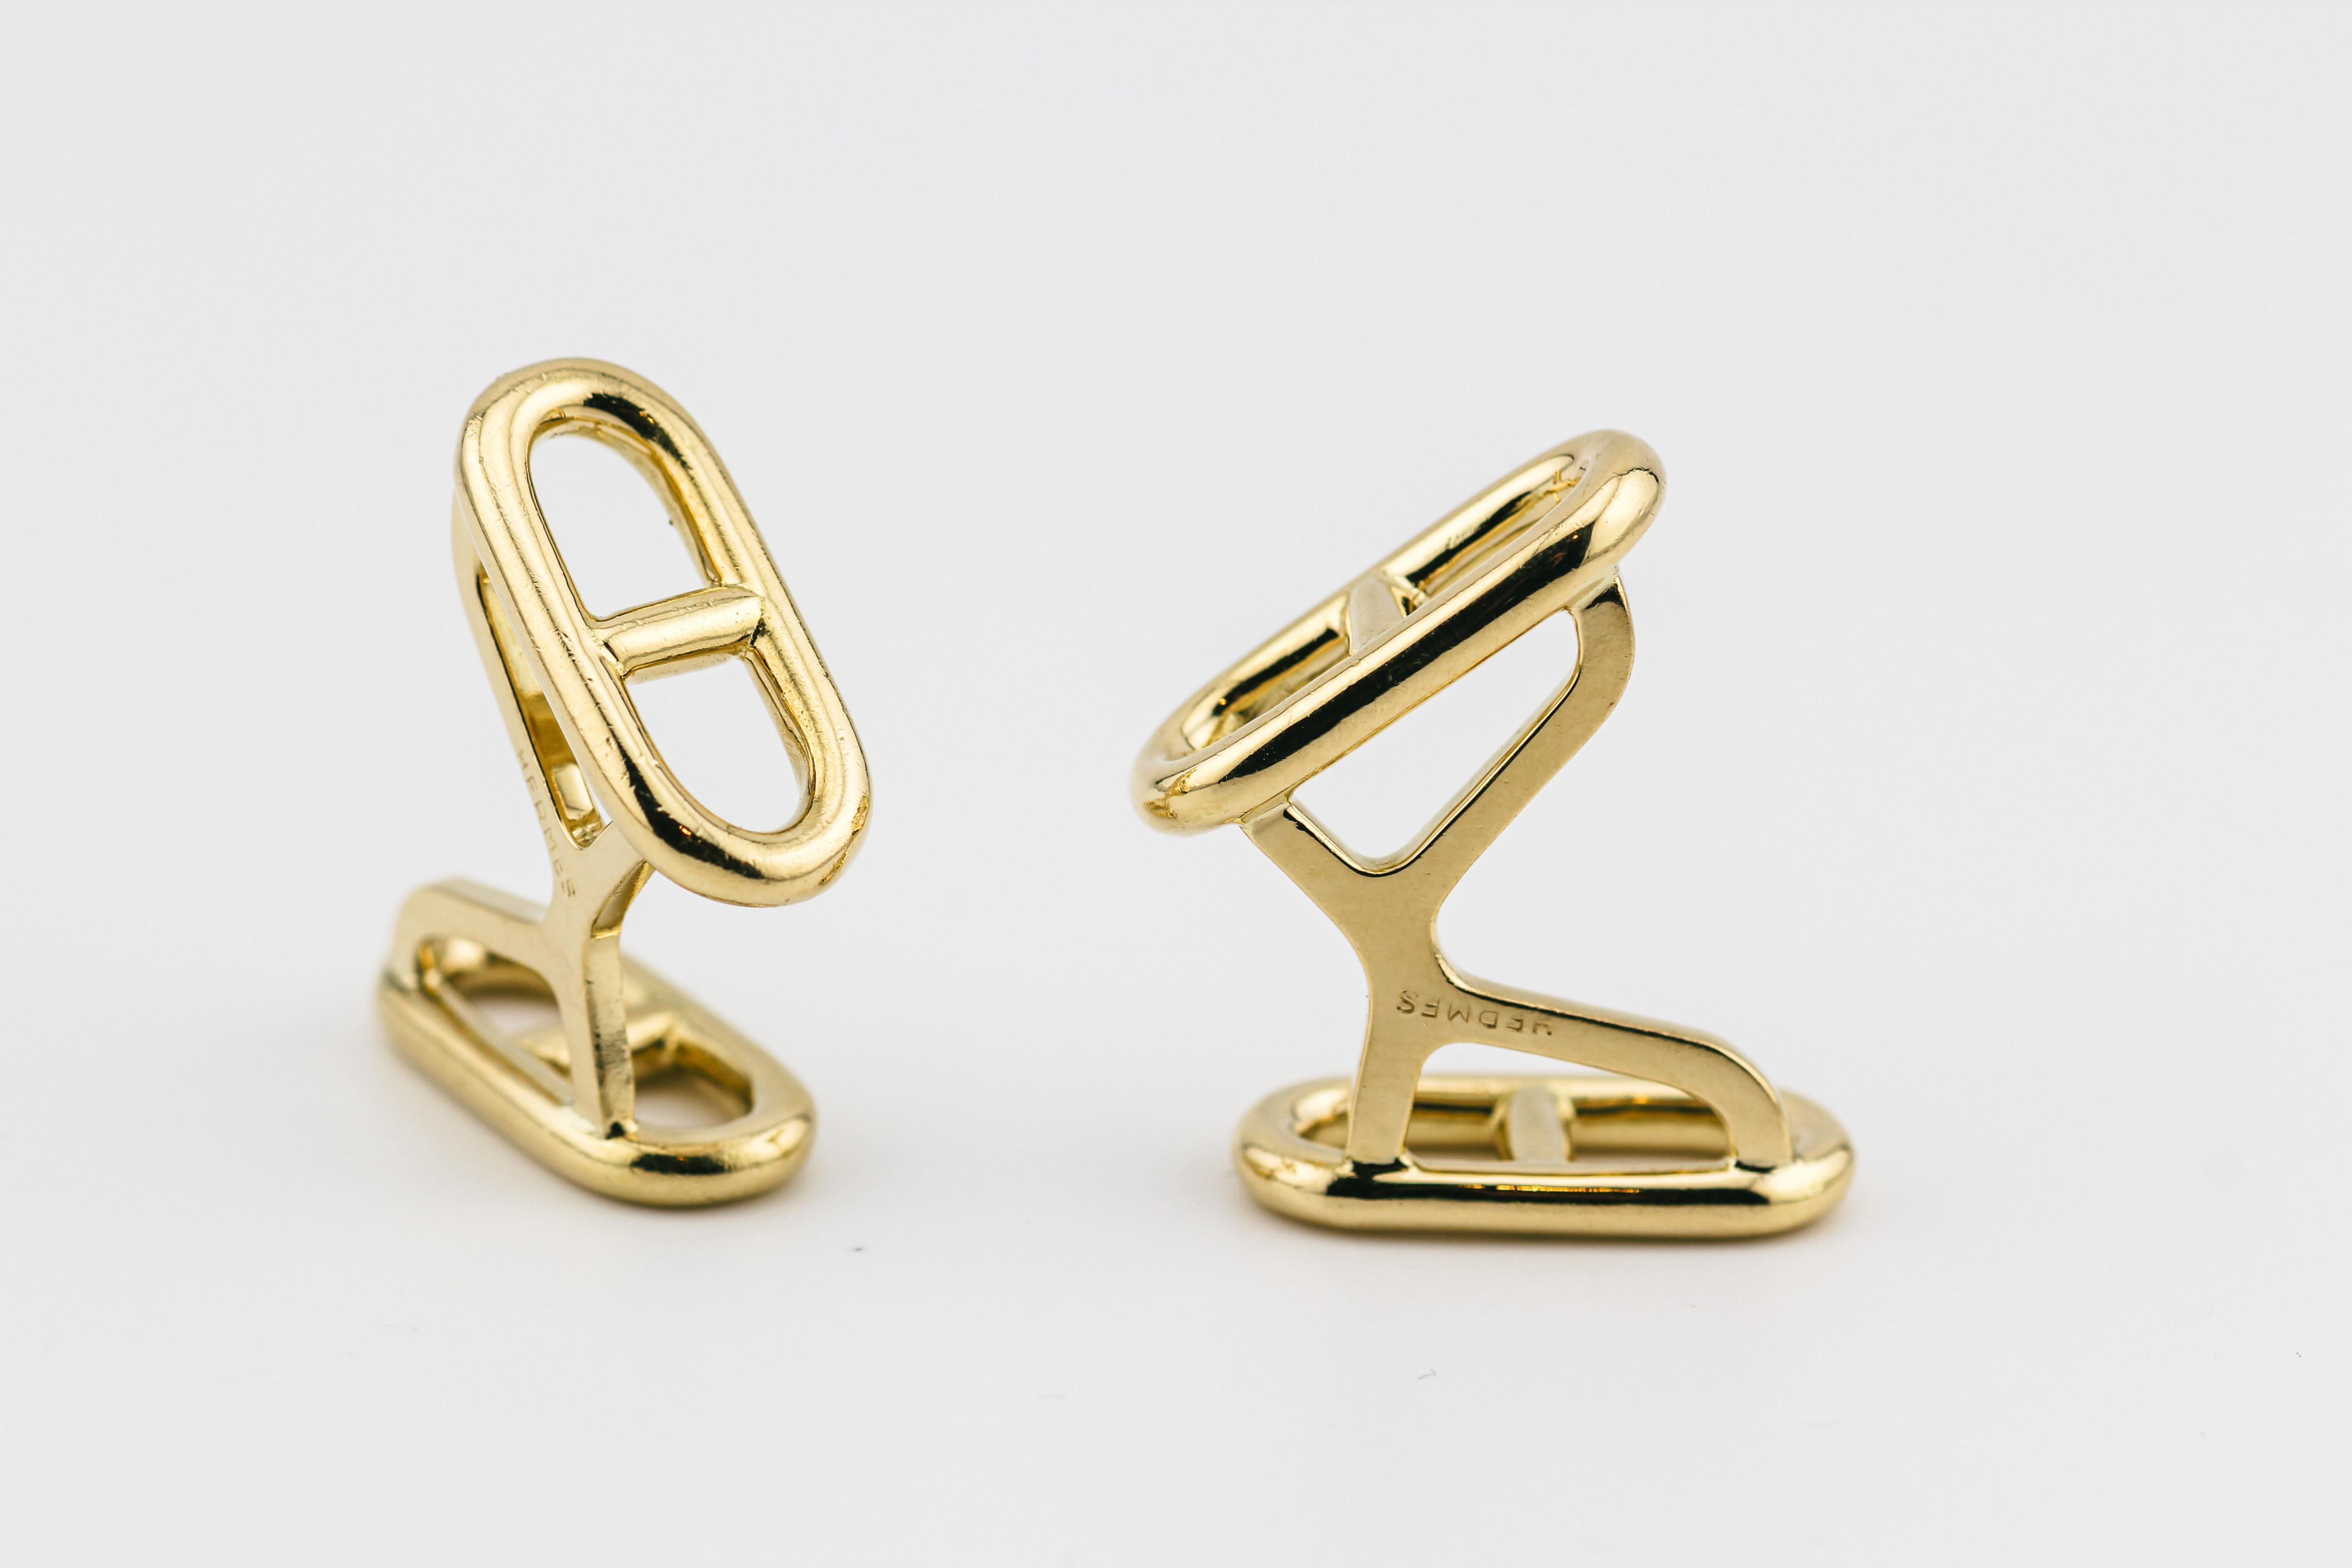 Hermes Vintage 1970s Chaine D'Ancre 18k Gold Cufflinks For Sale 2